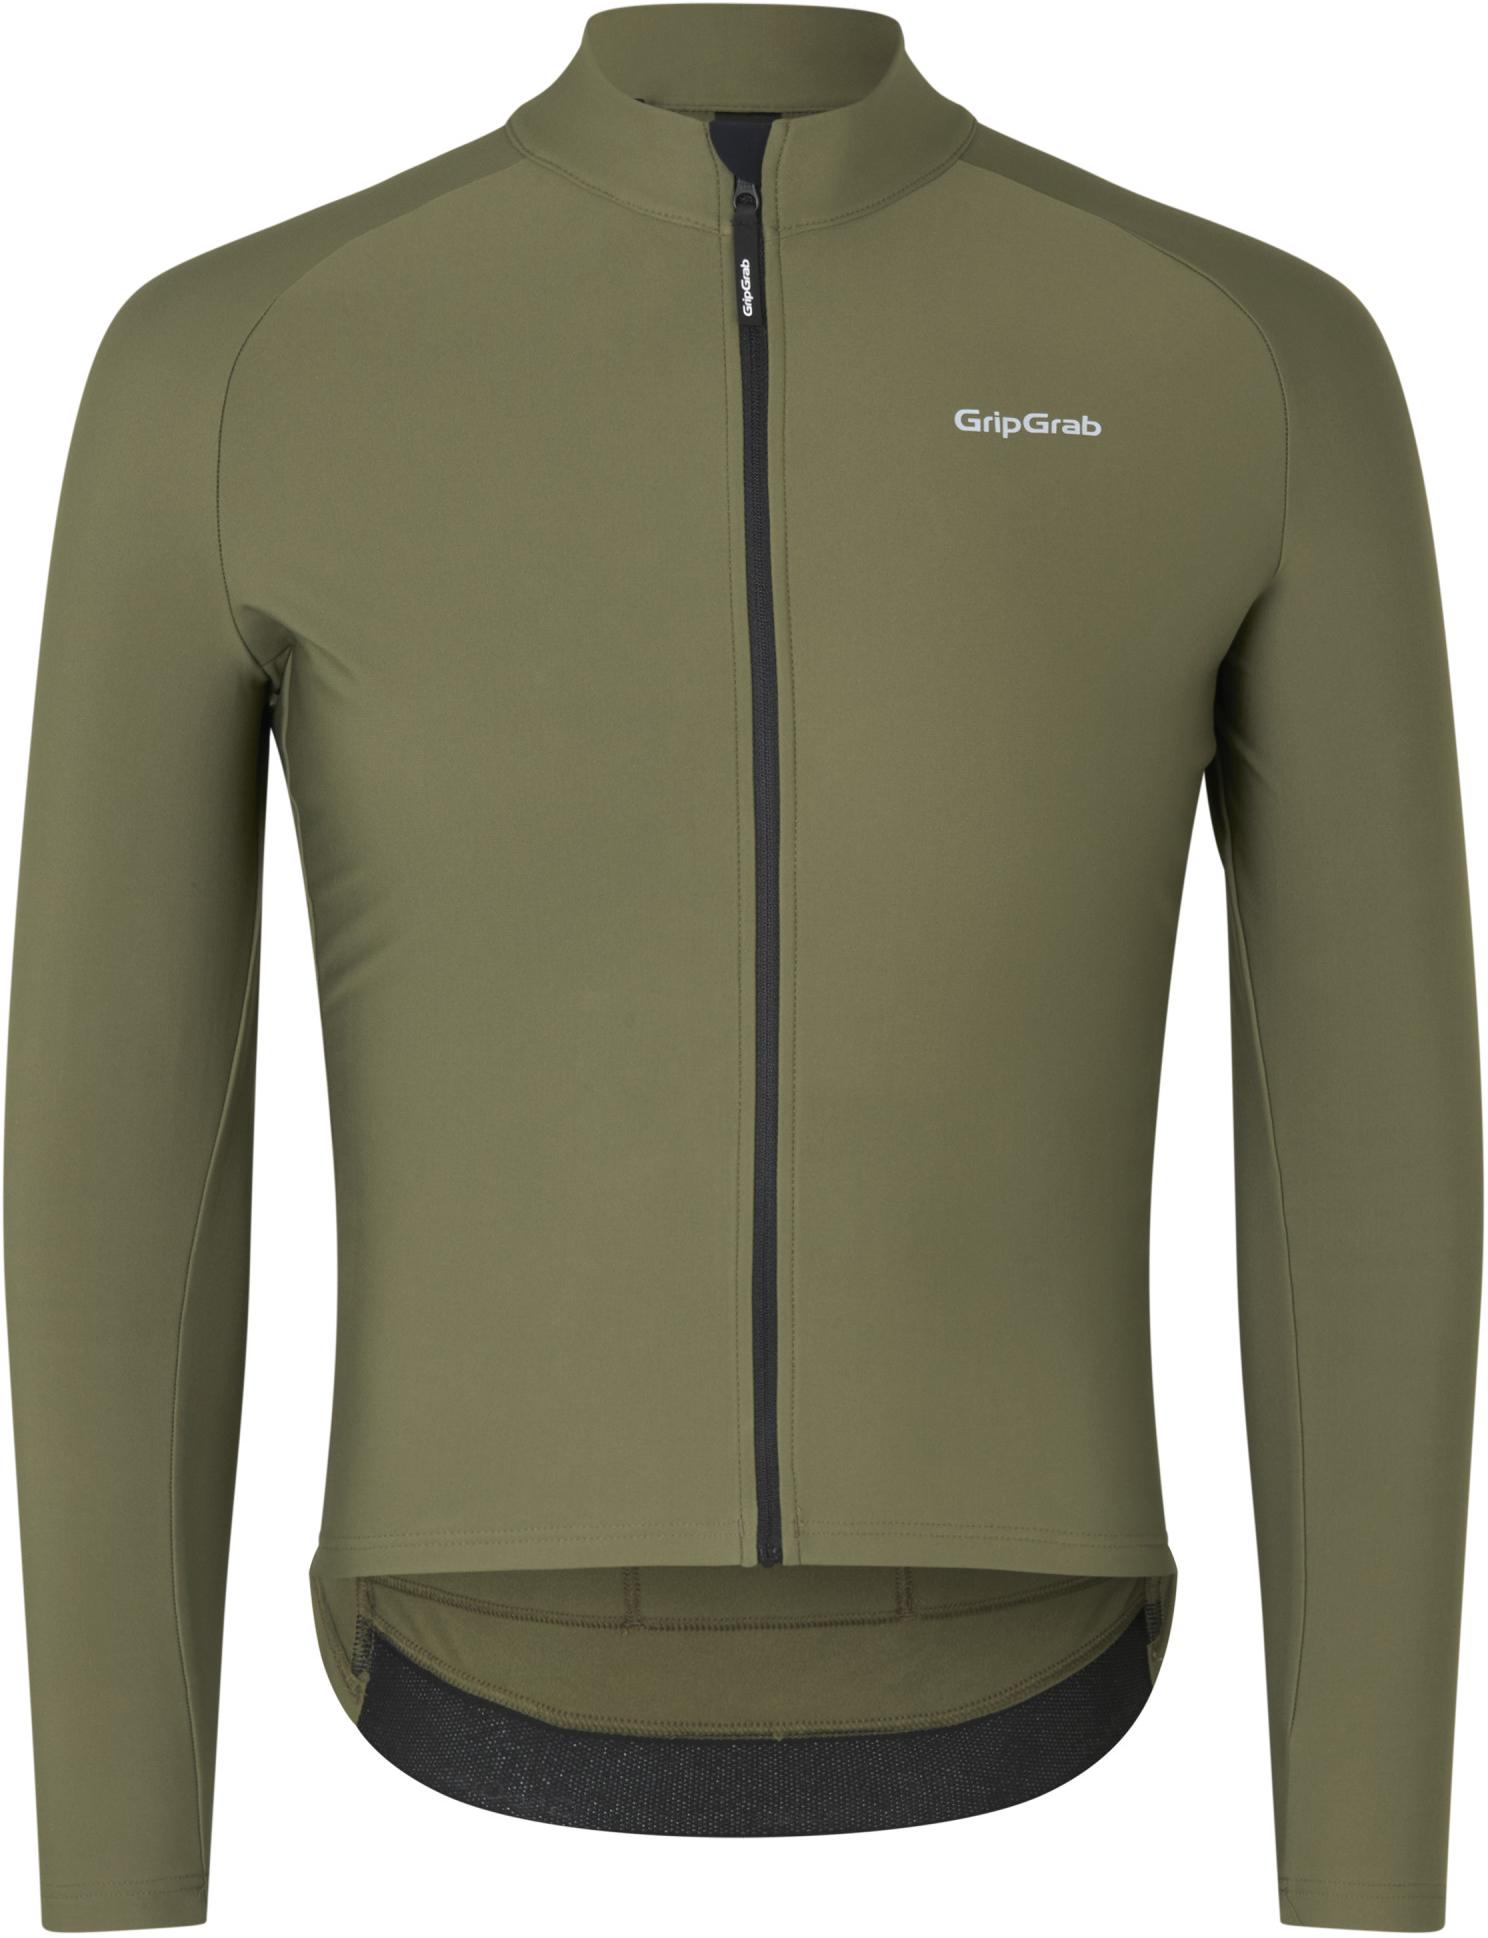 Gripgrab Thermapace Thermal Long Sleeve Jersey  Olive Green